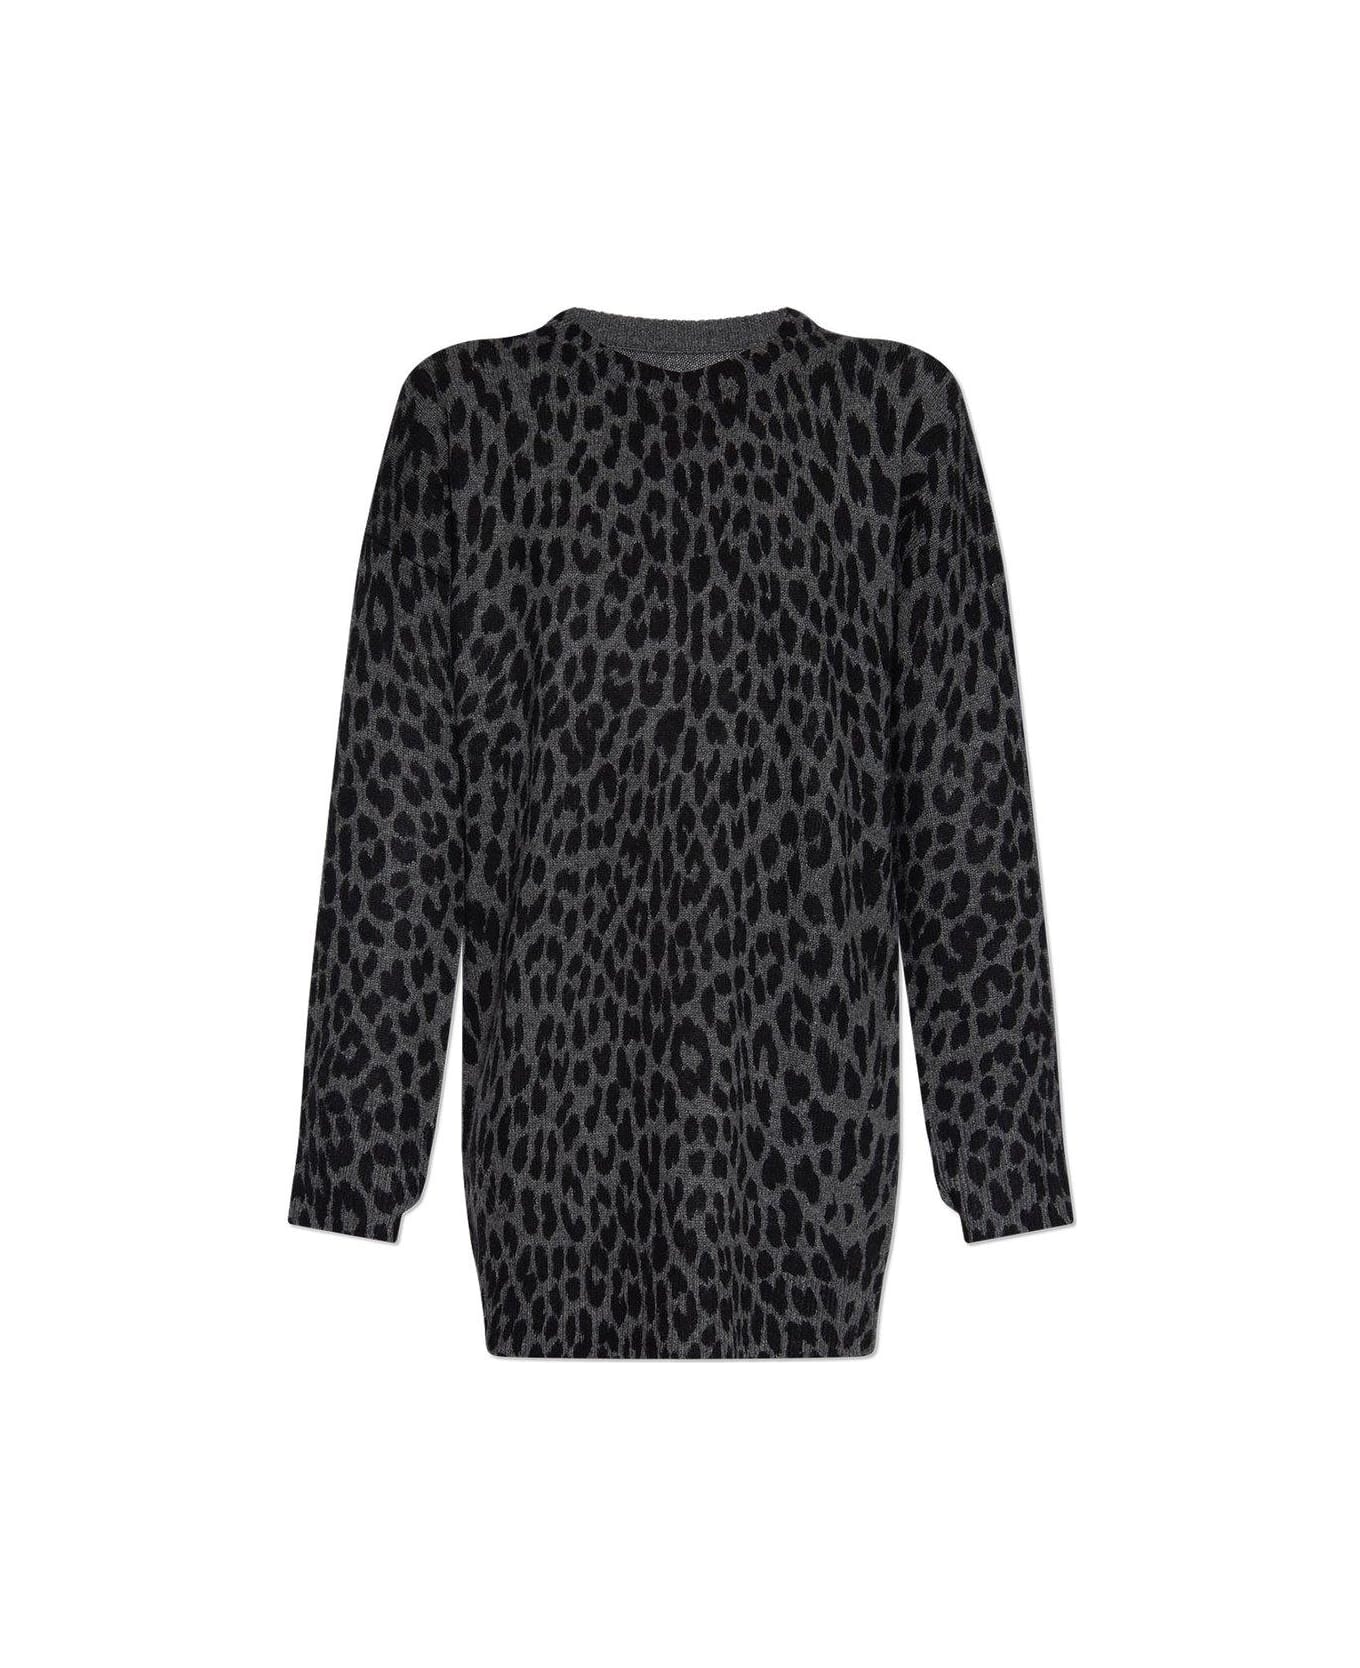 Zadig & Voltaire Malia Leopard Long Sleeved Dress - Charcoal